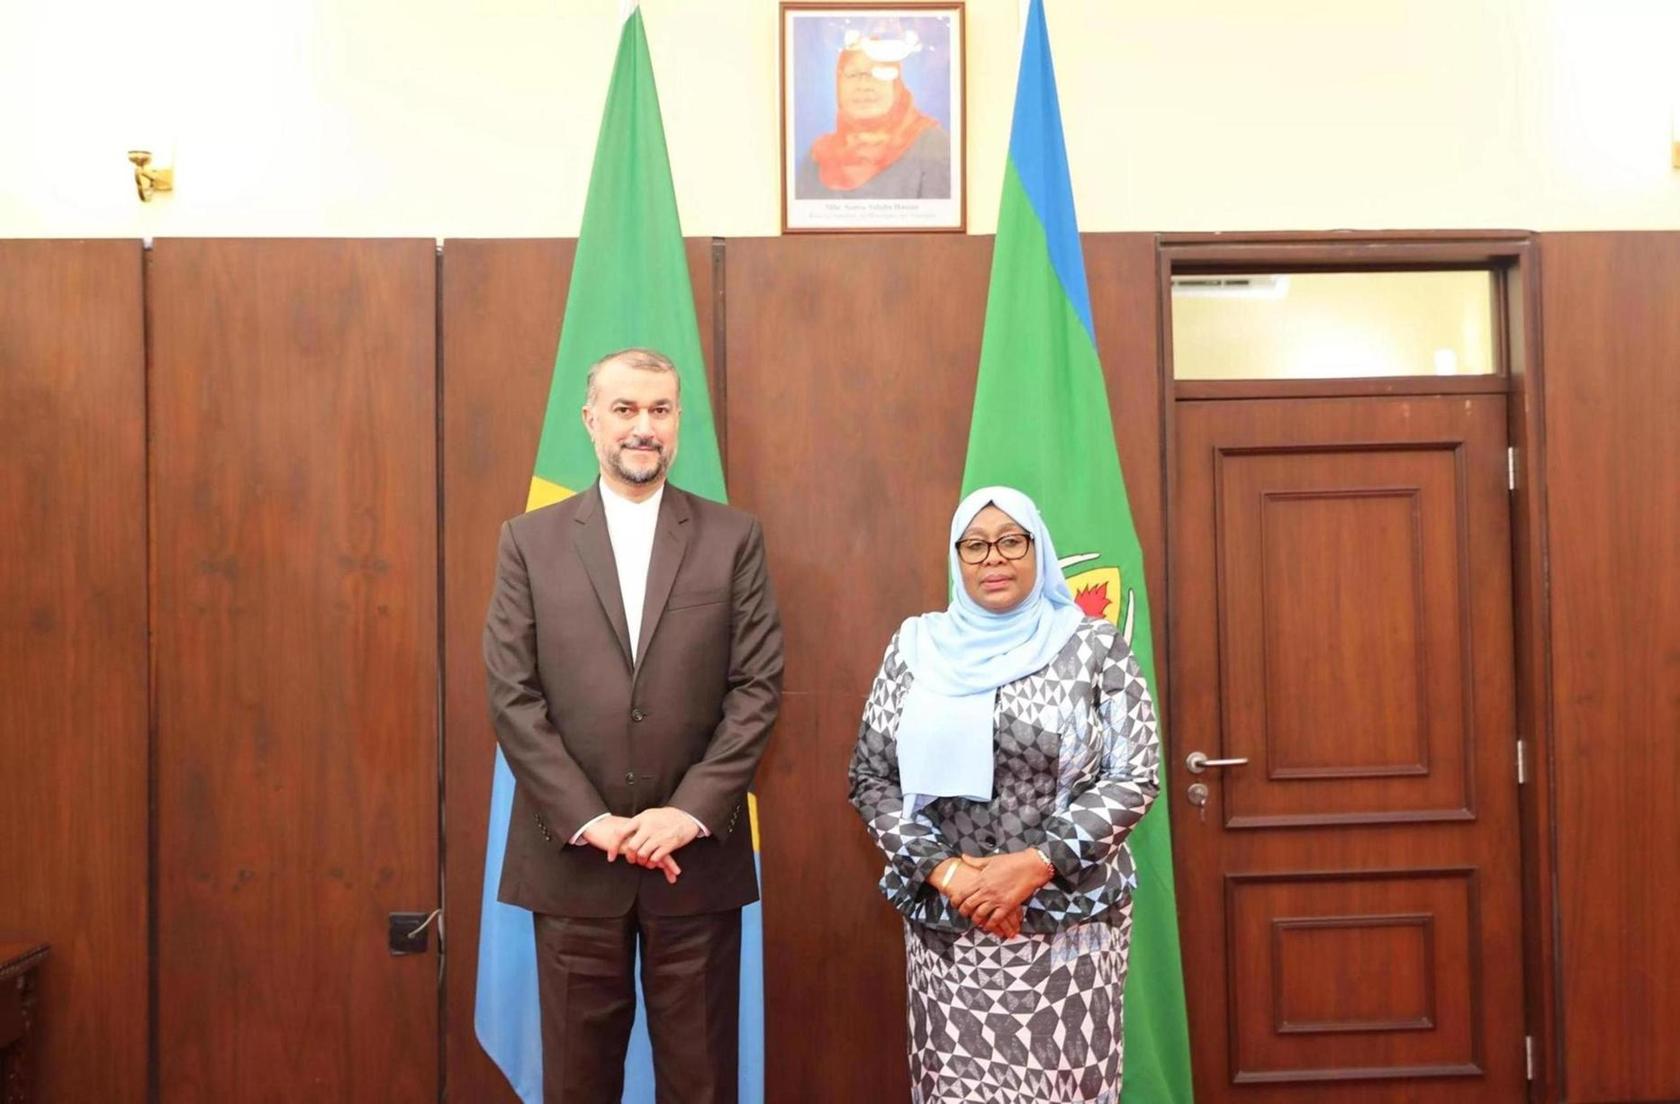 The meeting of Iran's Foreign Minister Amir Abdollahian with the President Mrs. Samaya Solhu Hassan